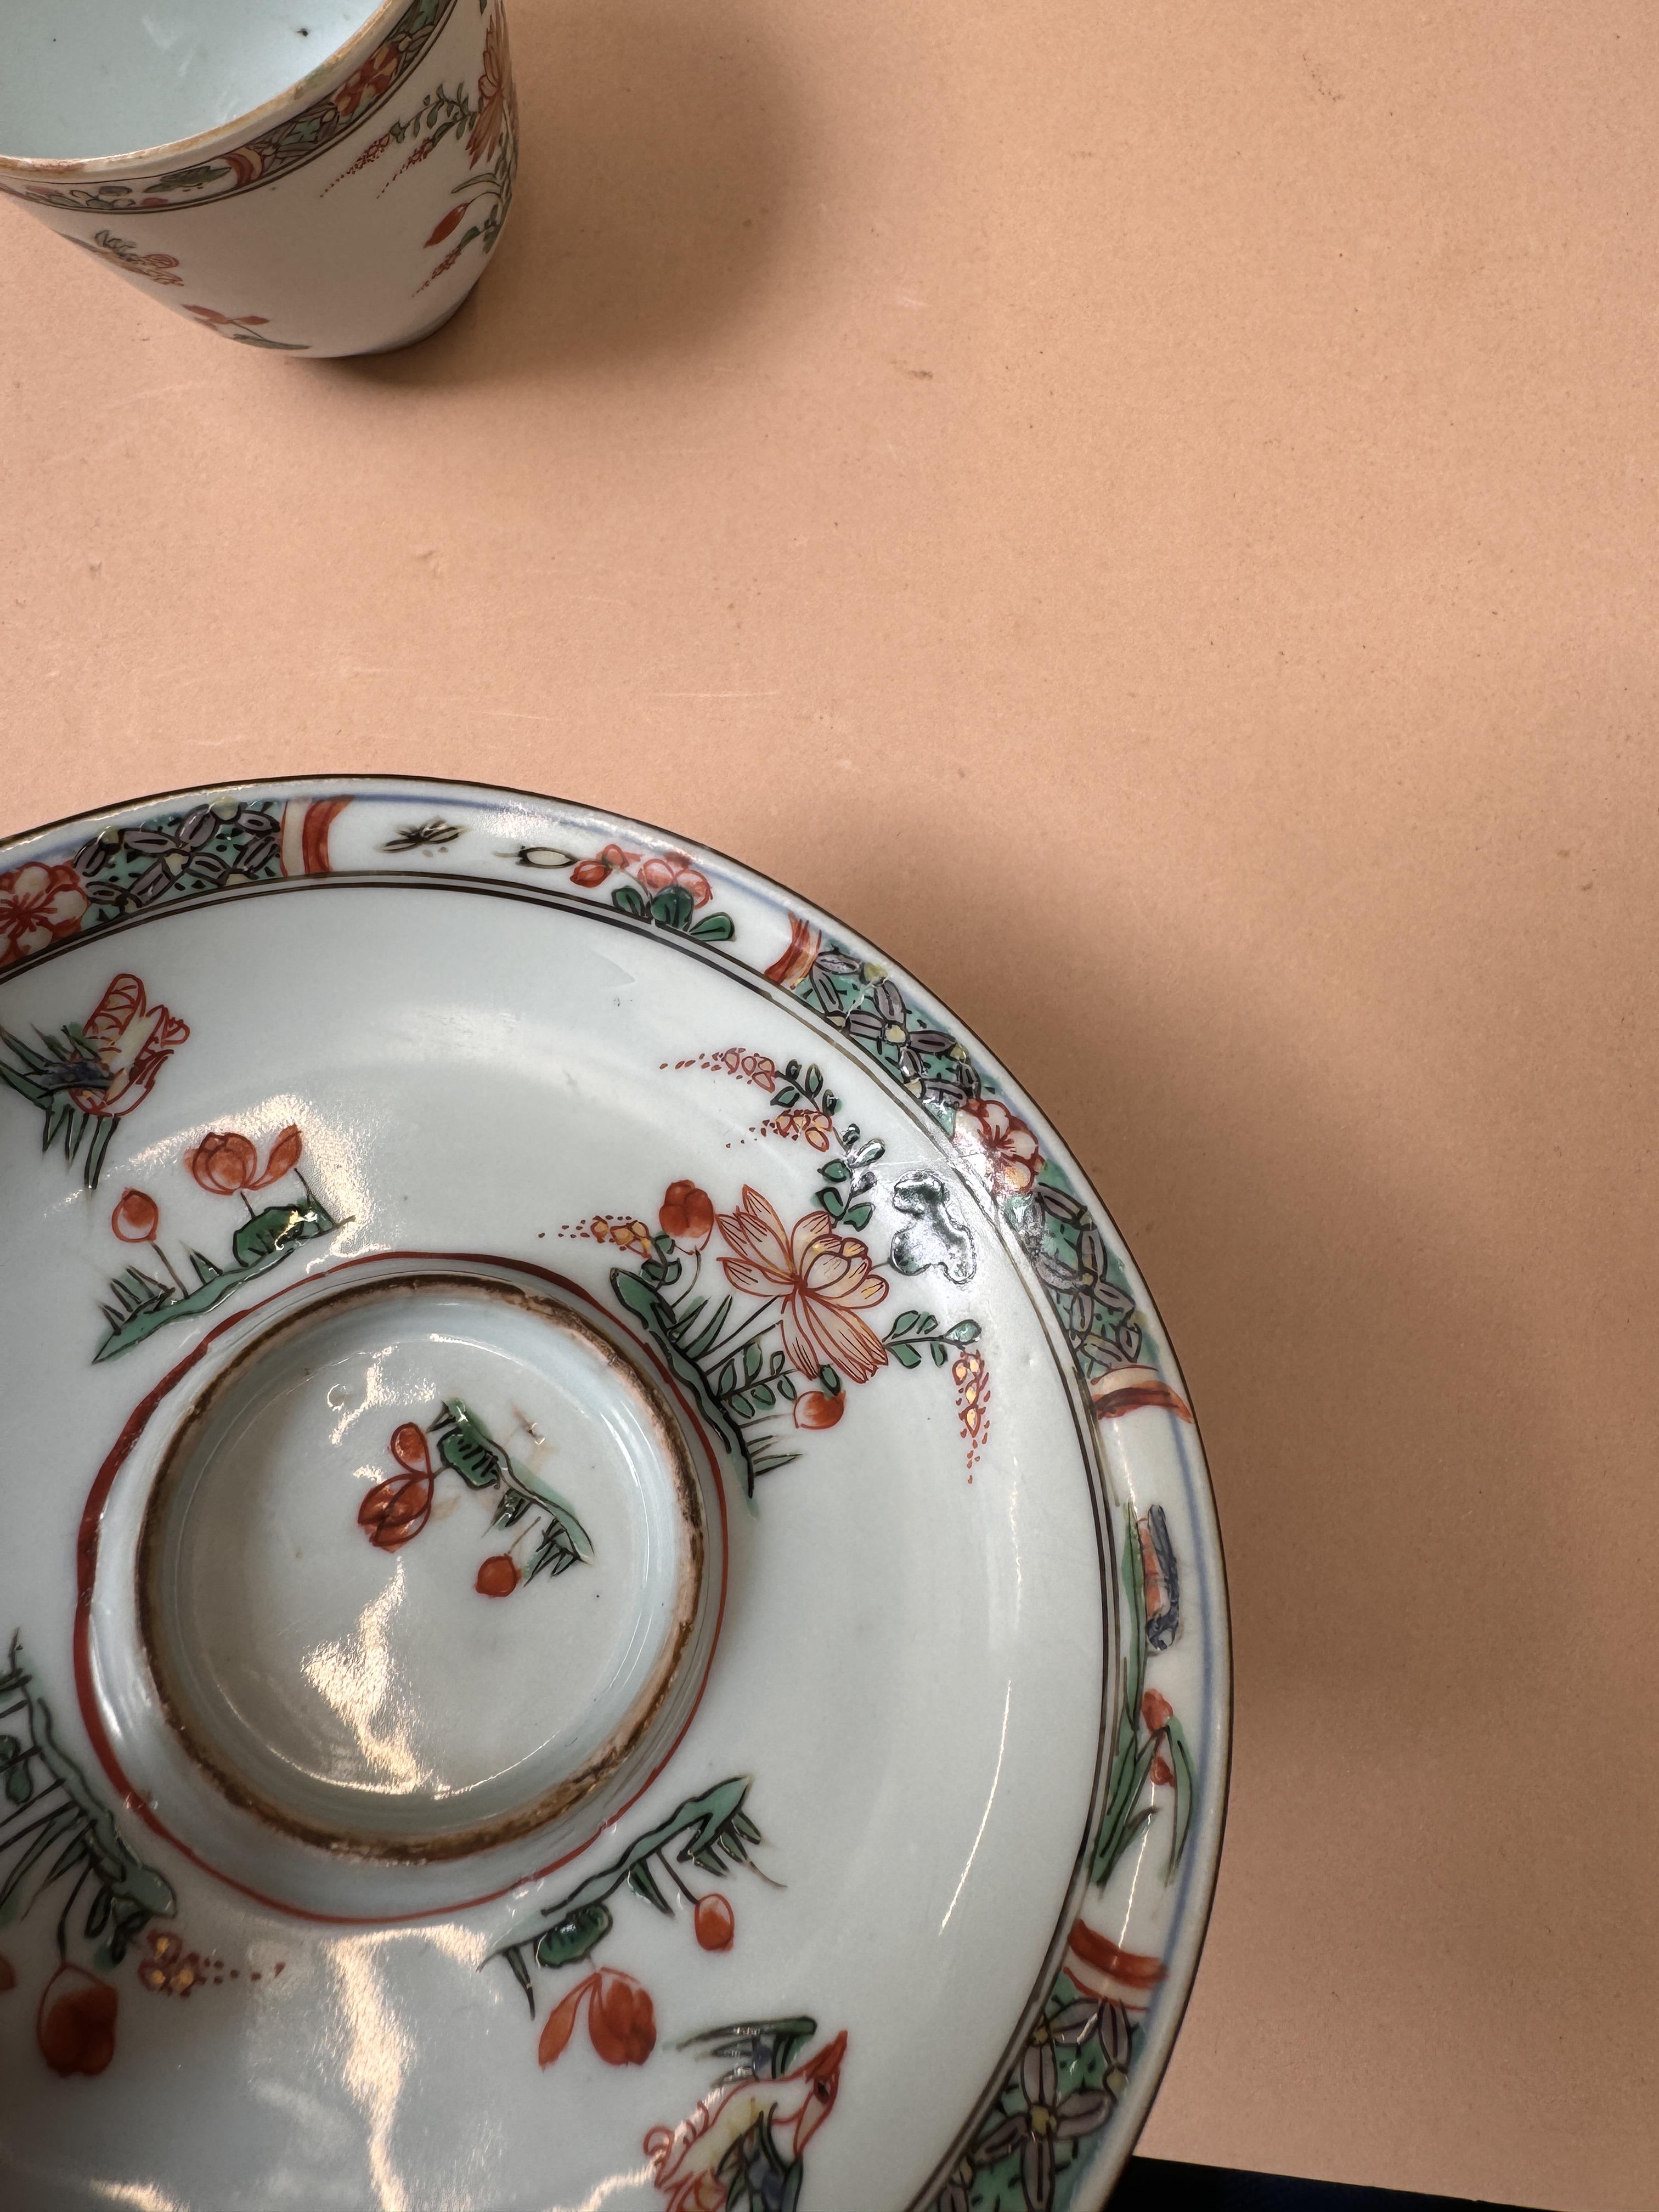 A CHINESE FAMILLE-VERTE CUP AND SAUCER 清康熙 五彩花鳥圖盃連盤 - Image 18 of 18